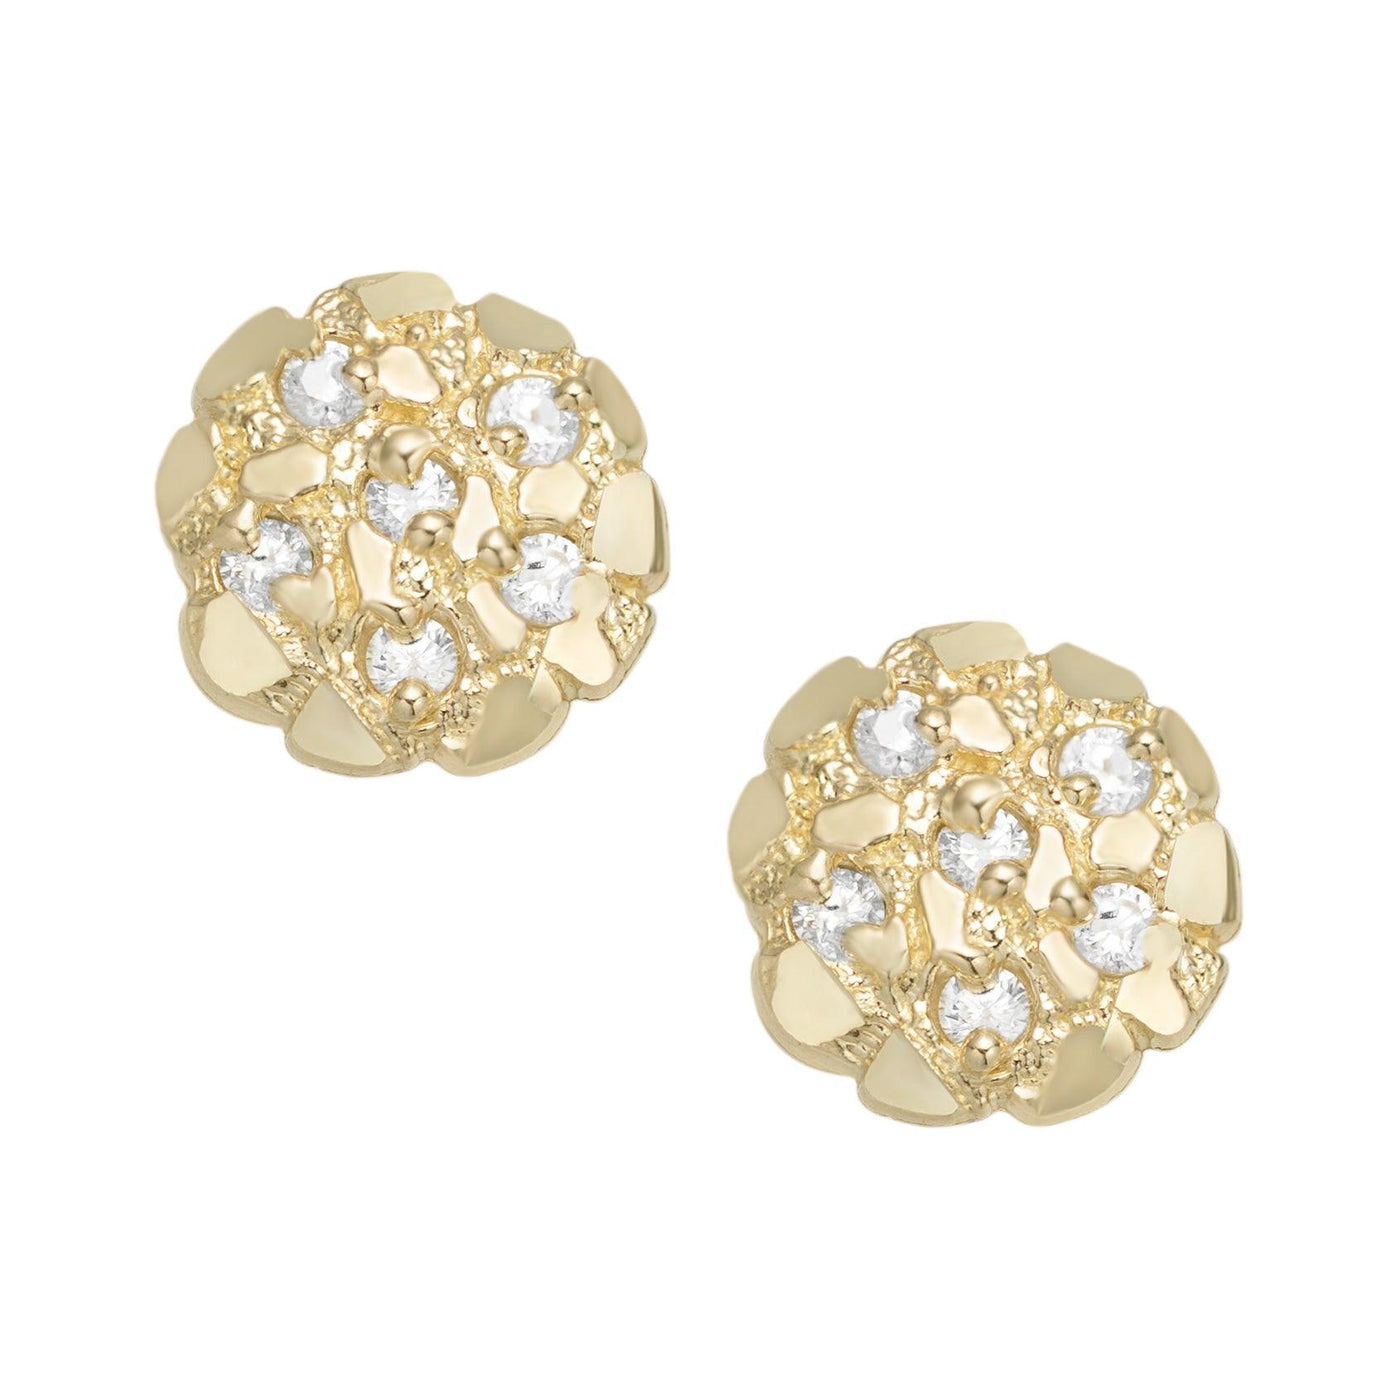 Women's Small Round CZ Nugget Stud Earrings Solid 10K Yellow Gold - bayamjewelry